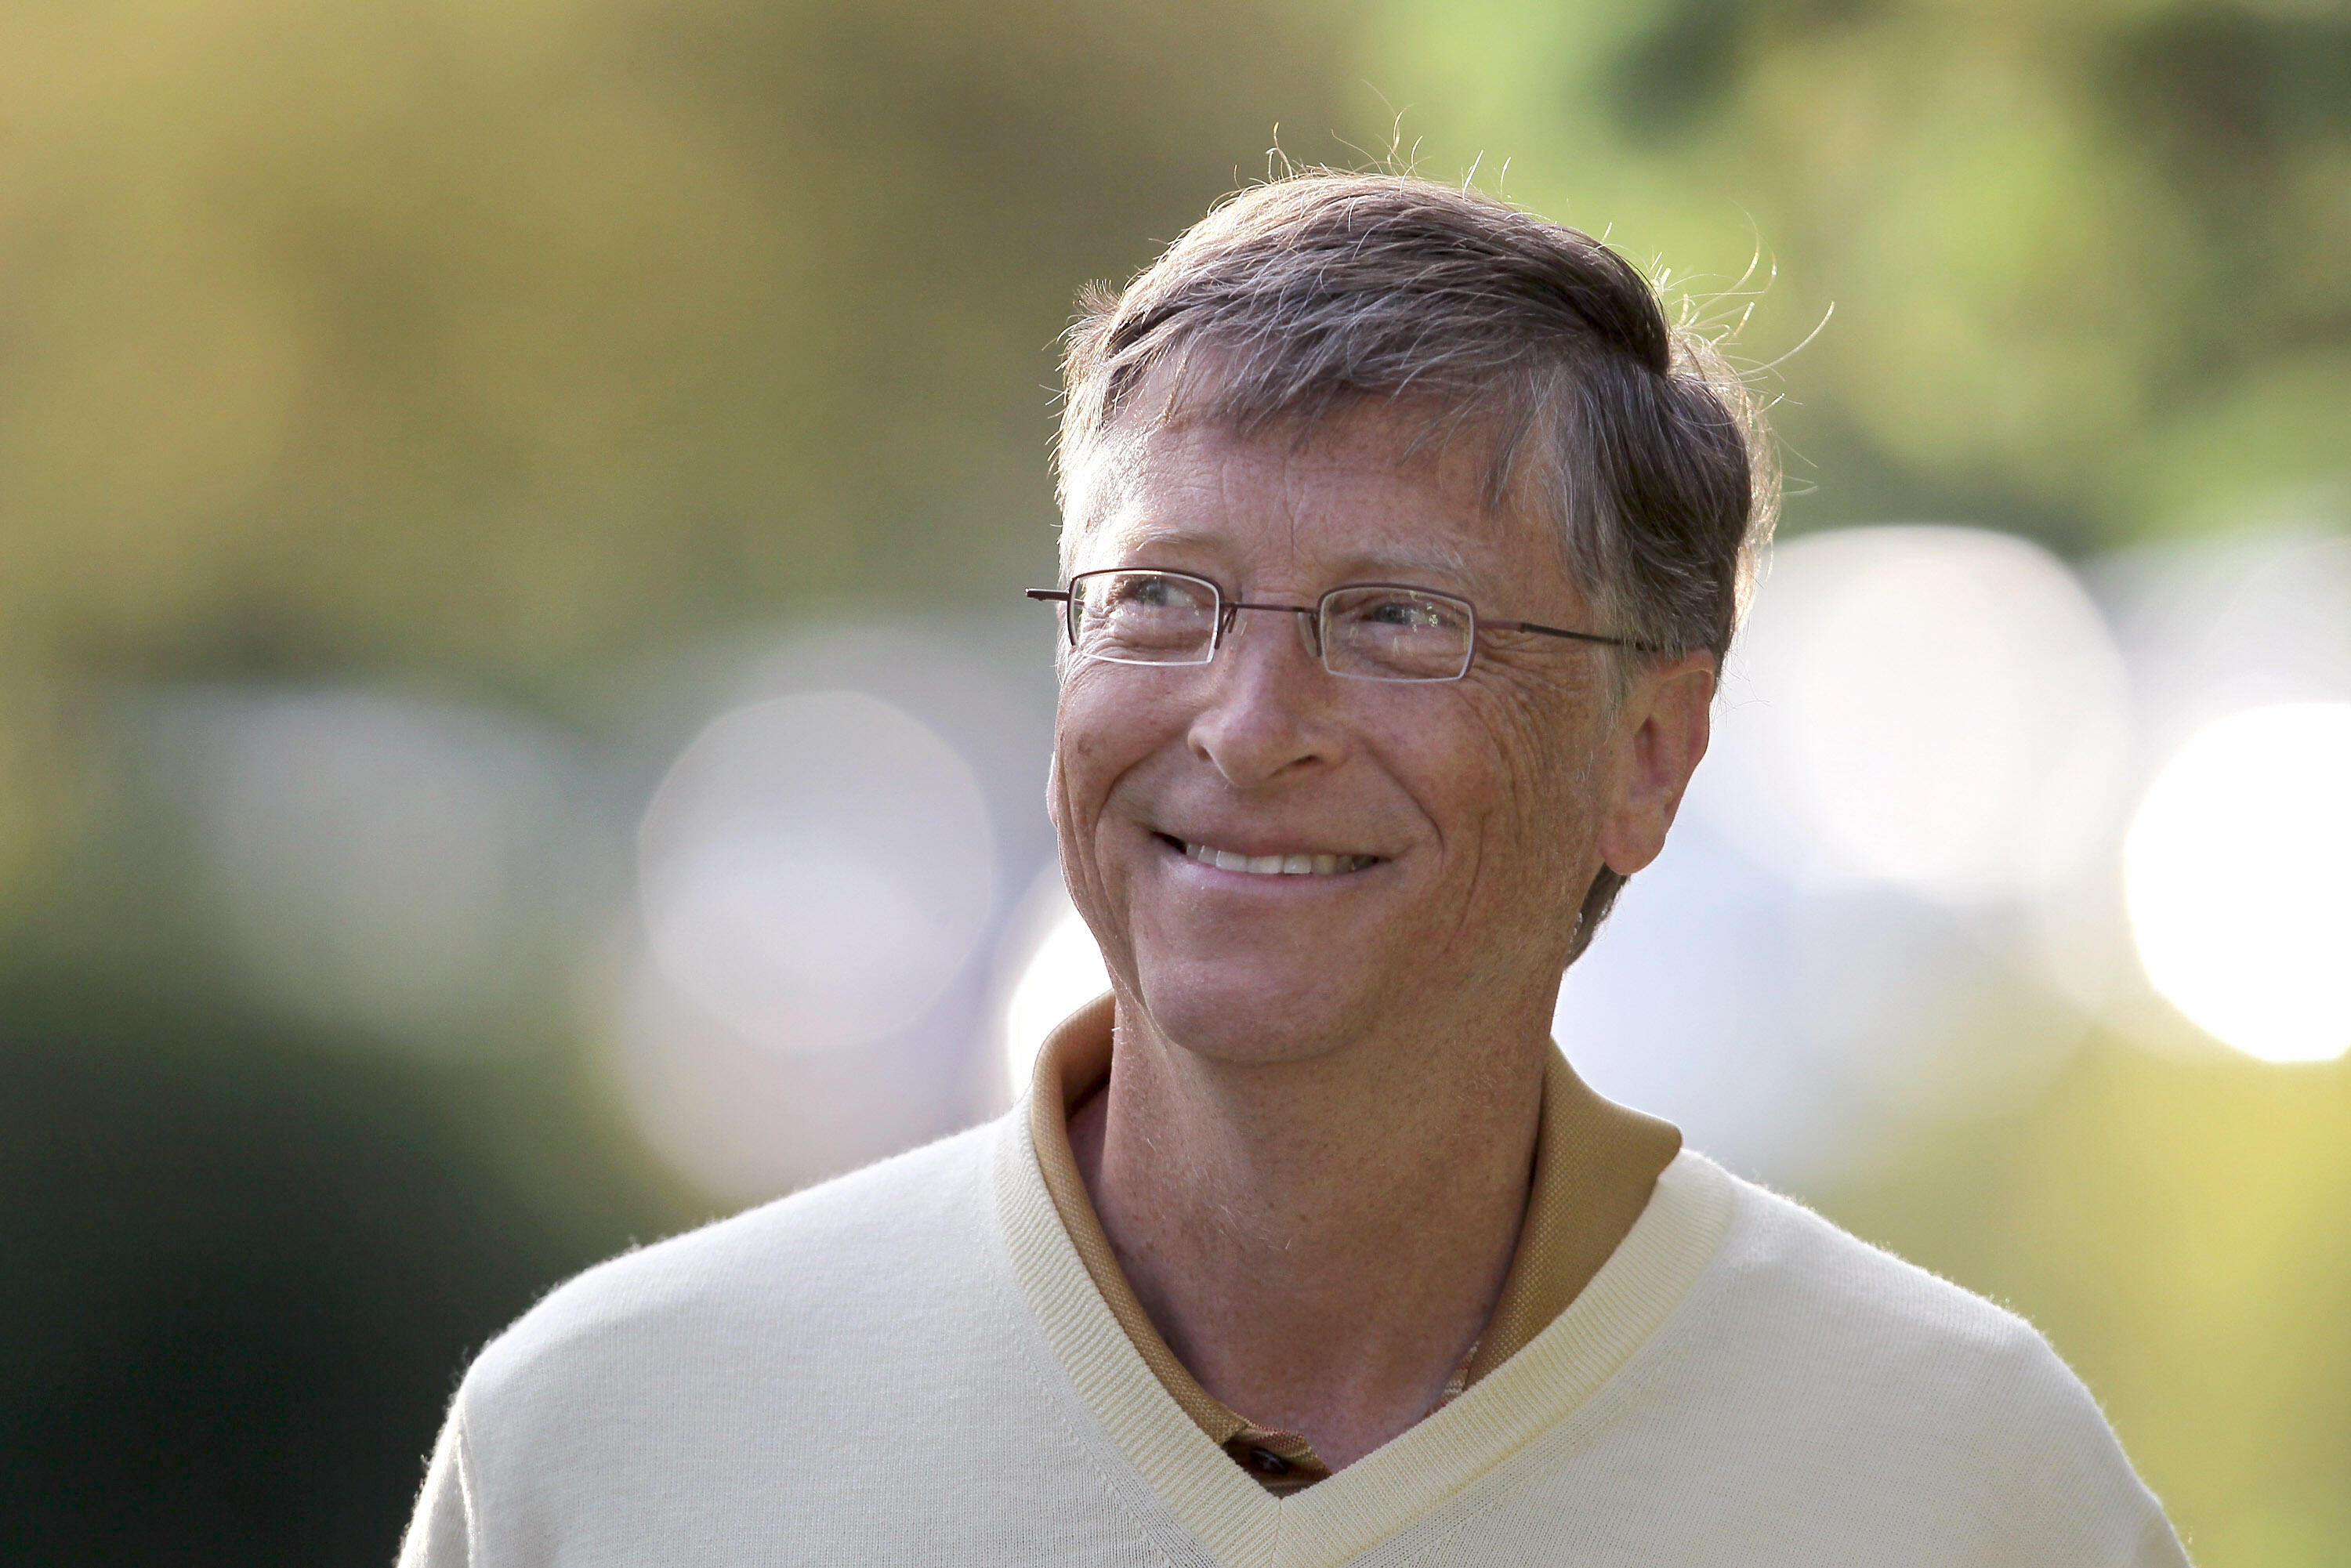 SUN VALLEY, ID - JULY 07:  Bill Gates, chairman of Microsoft, attends the Allen & Company Sun Valley Conference on July 7, 2011 in Sun Valley, Idaho. The conference has been hosted annually by the investment firm Allen & Company each July since 1983 and i